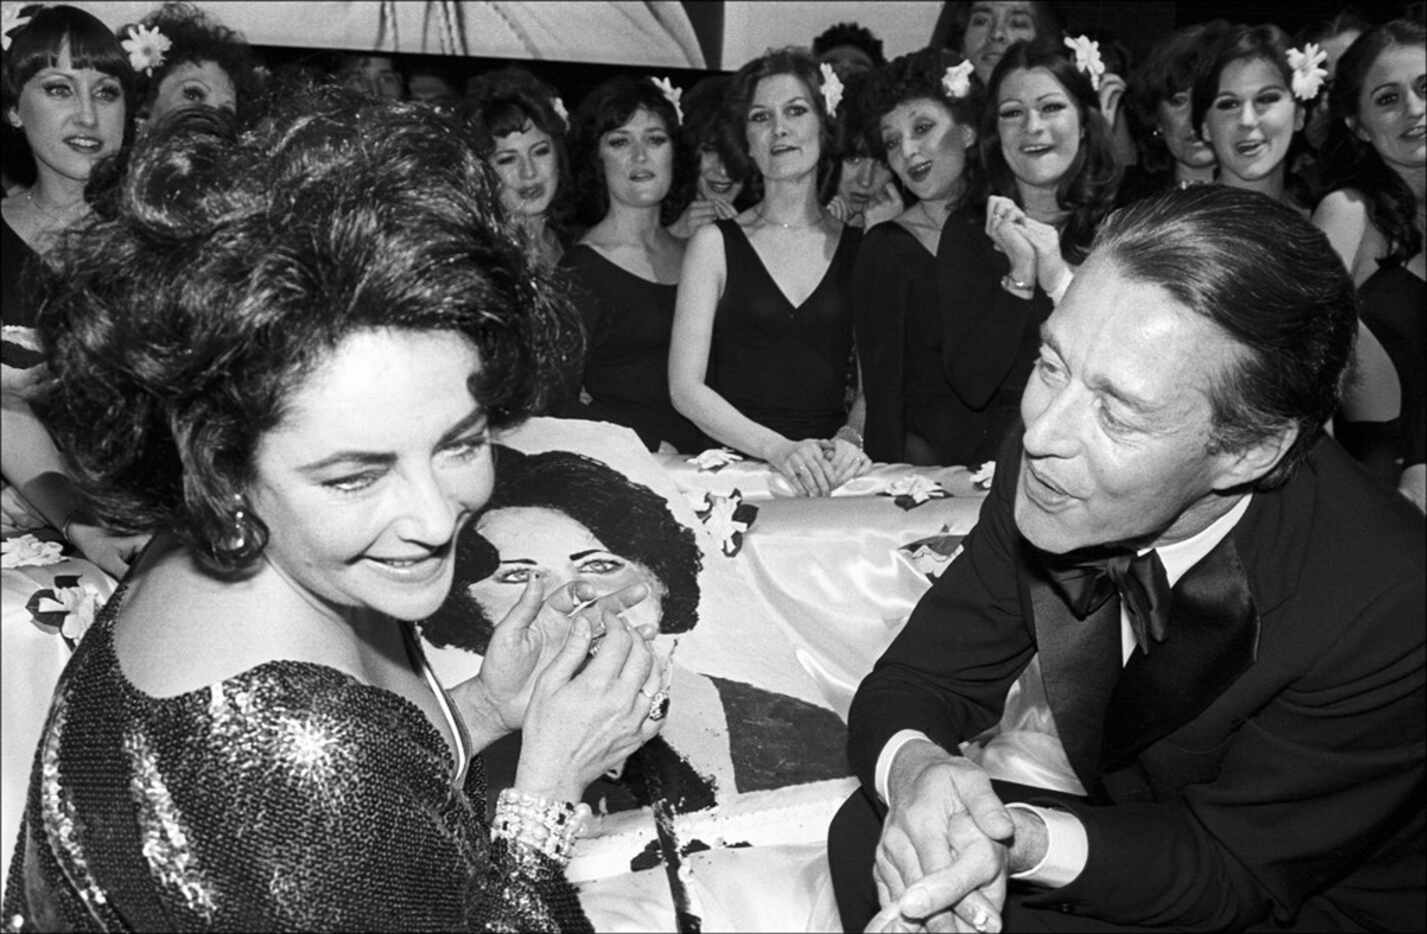 Halston, the fashion designer, with Elizabeth Taylor and the Rockettes at her birthday party...